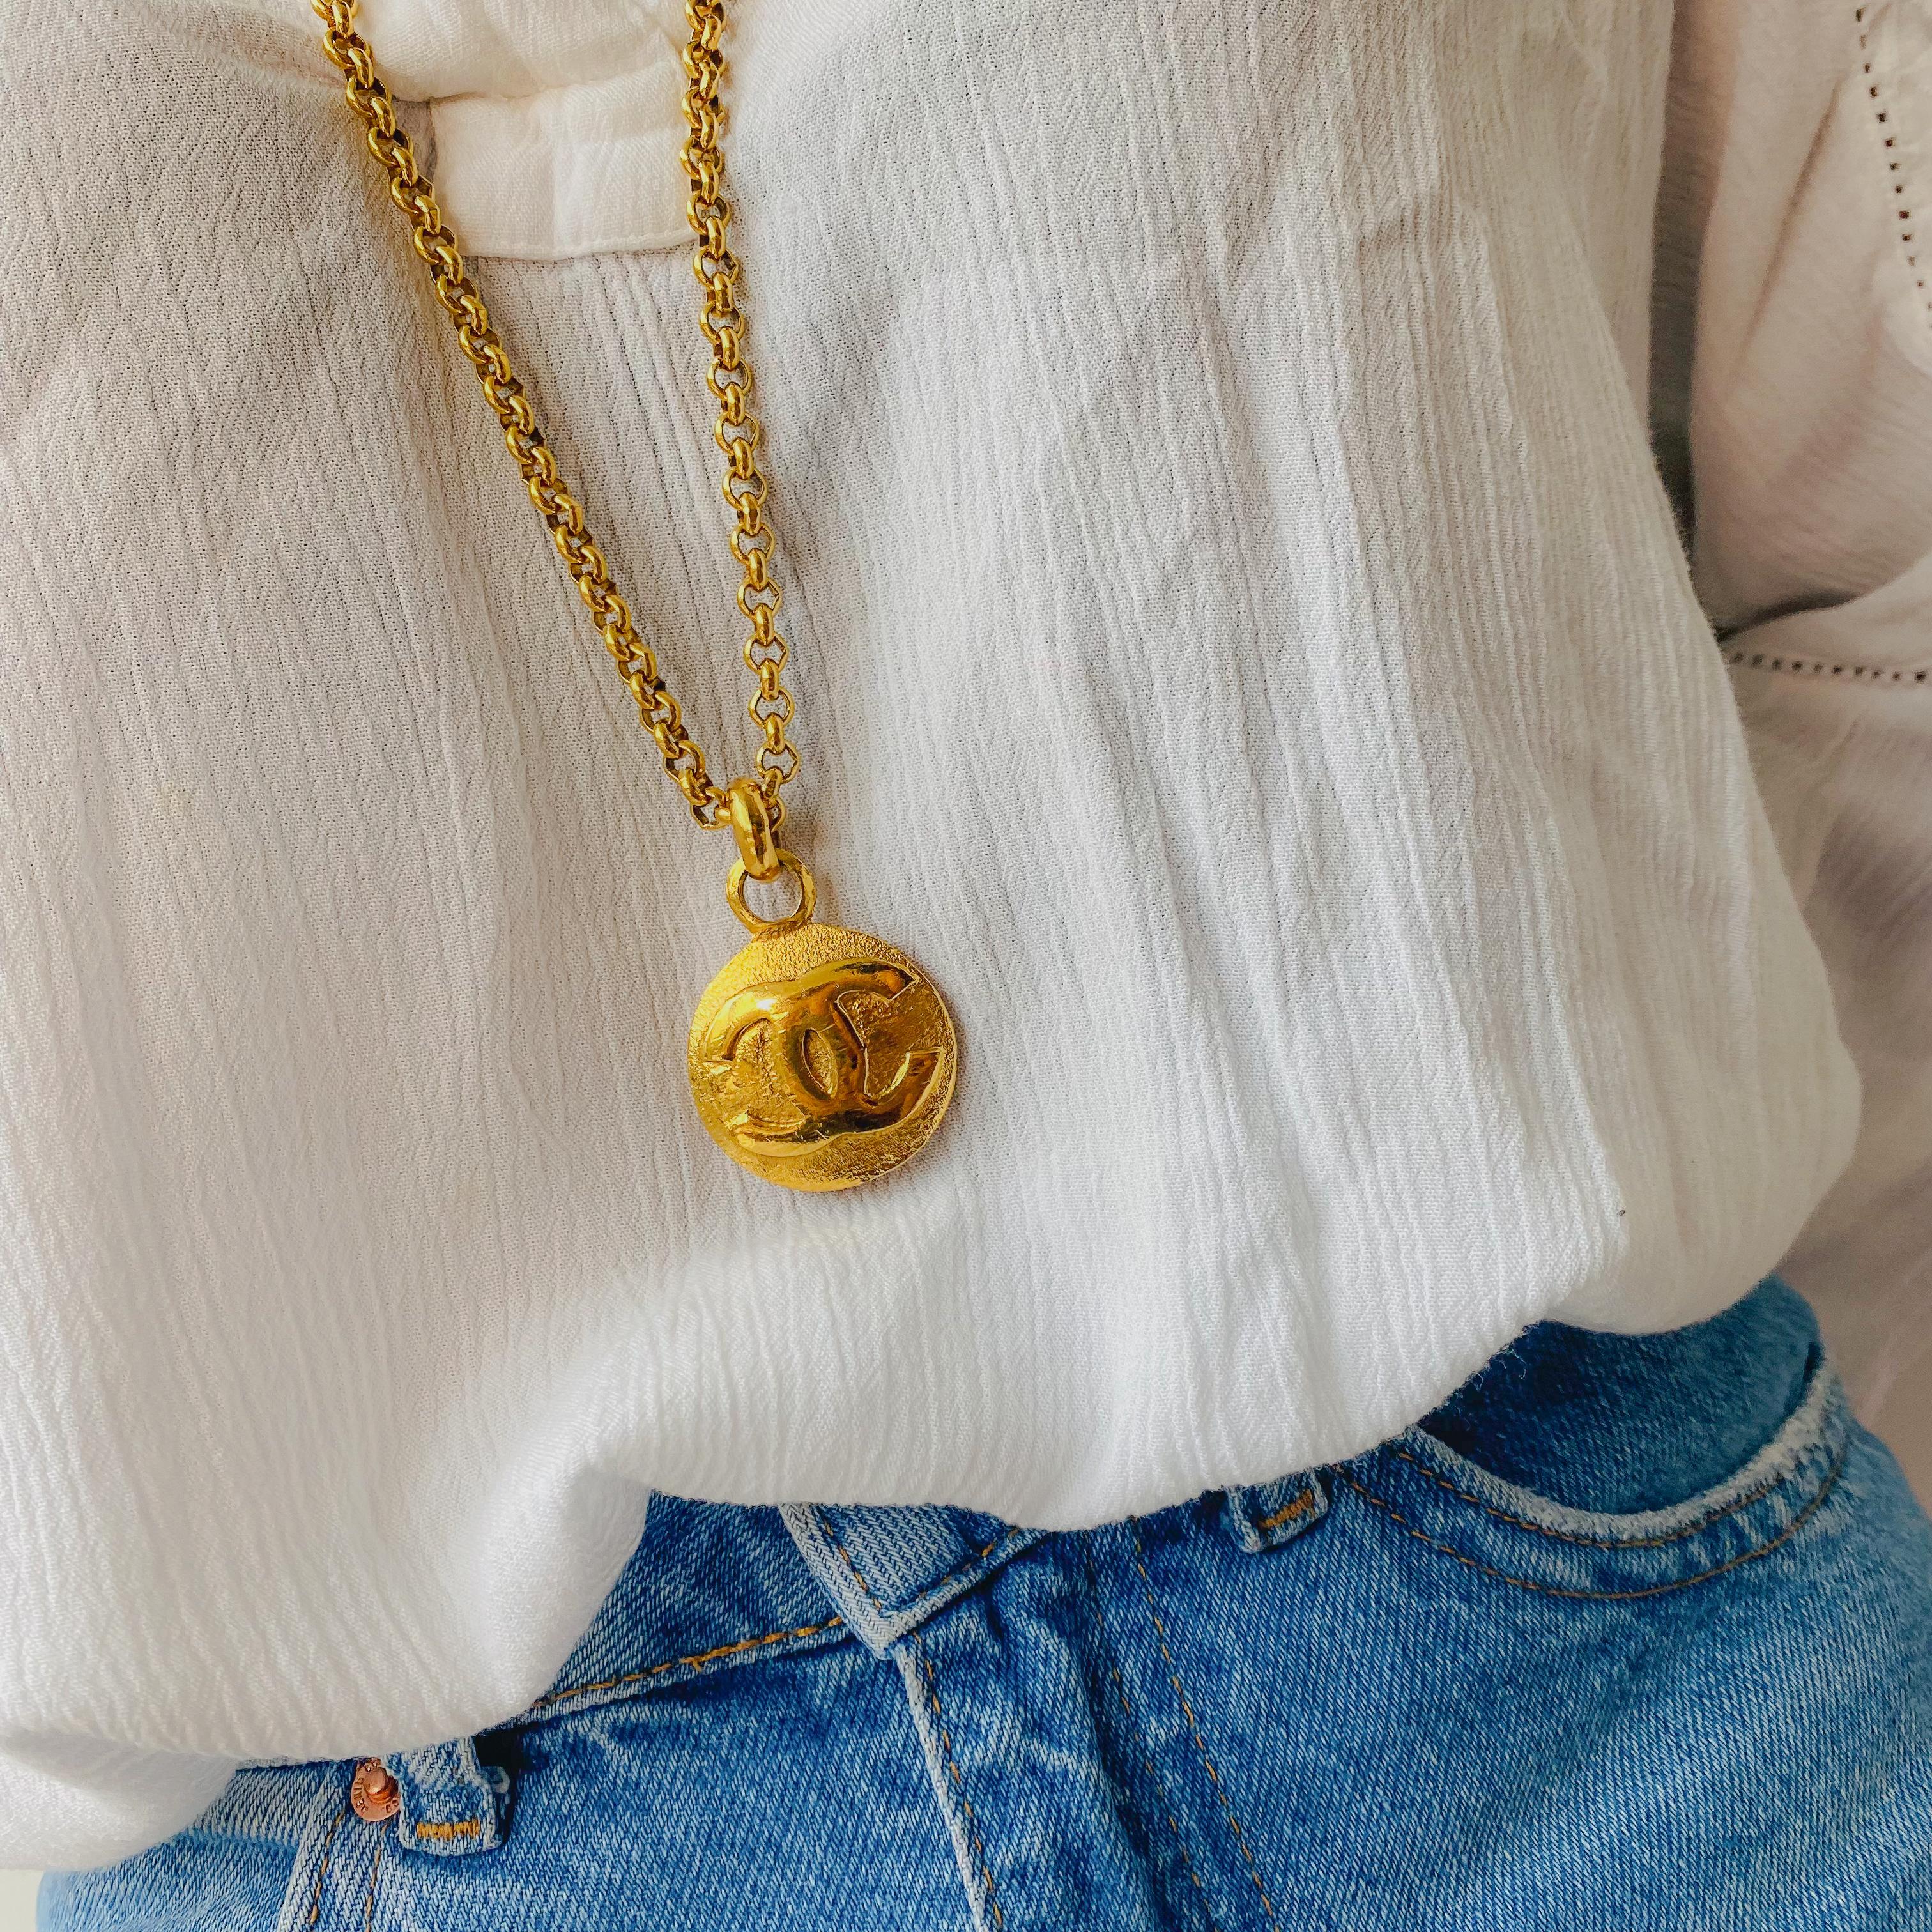 Chanel Vintage 1990s Pendant Necklace
A super versatile investment piece that will see you through the year day and night. Wear solo or layer up with smaller pendants and chains. Sure to give you a lifetime of joy!

Detail
-Made in France in